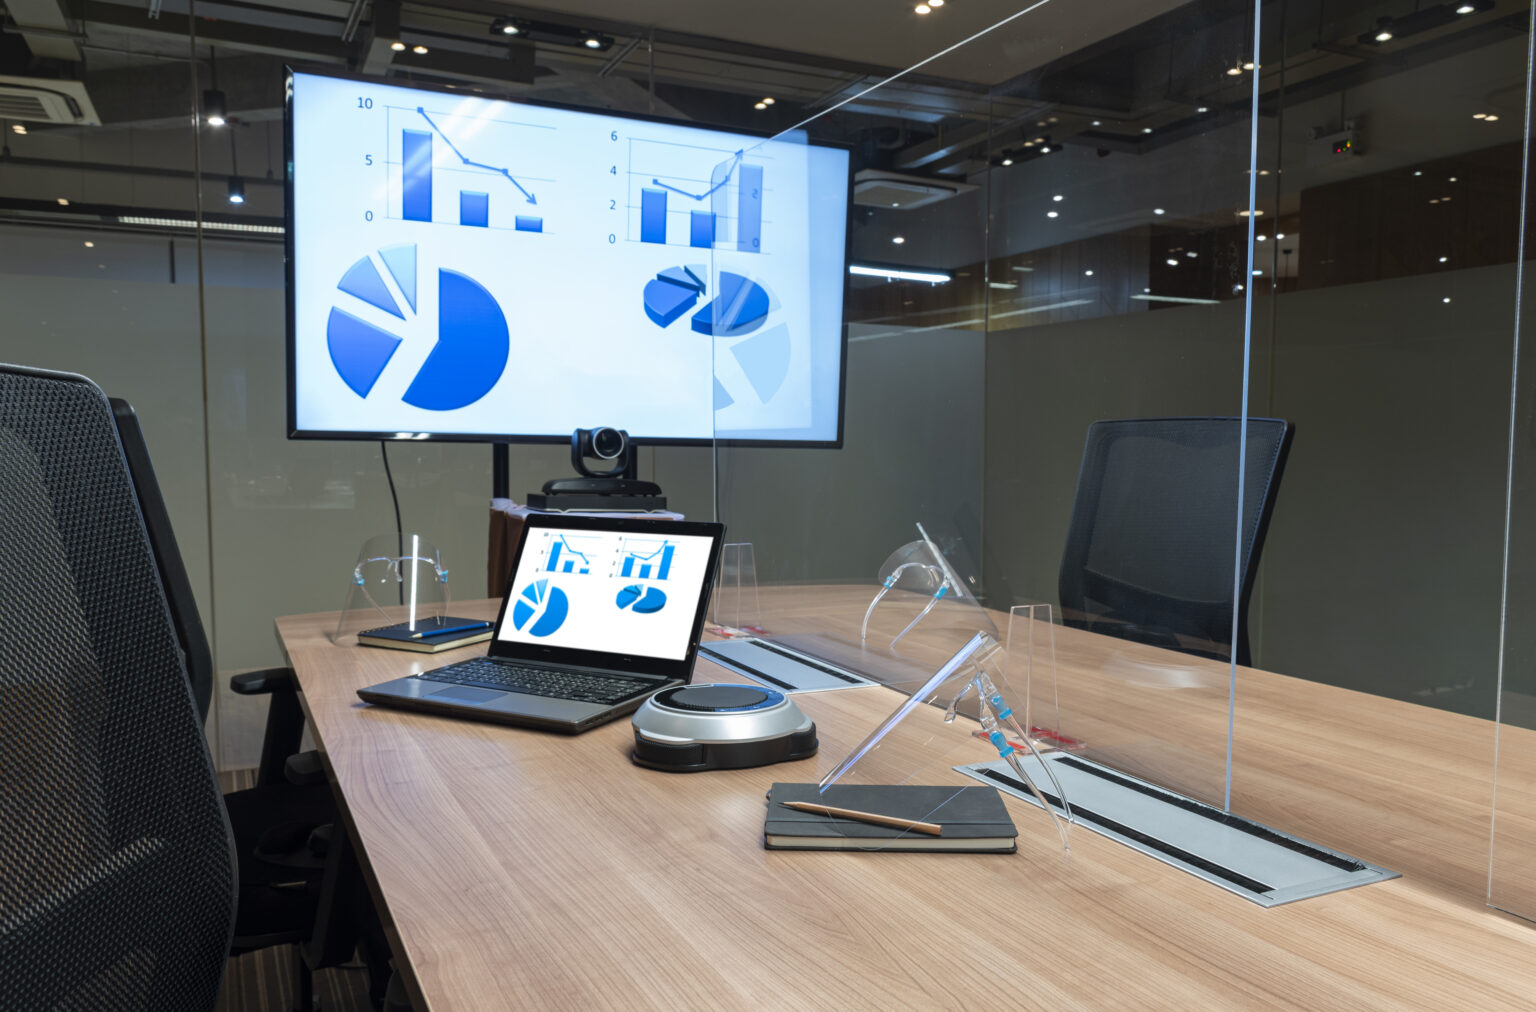 There two screens with charts are displayed in a modern office, illustrating an office suite software, one of the screens is a laptop screen